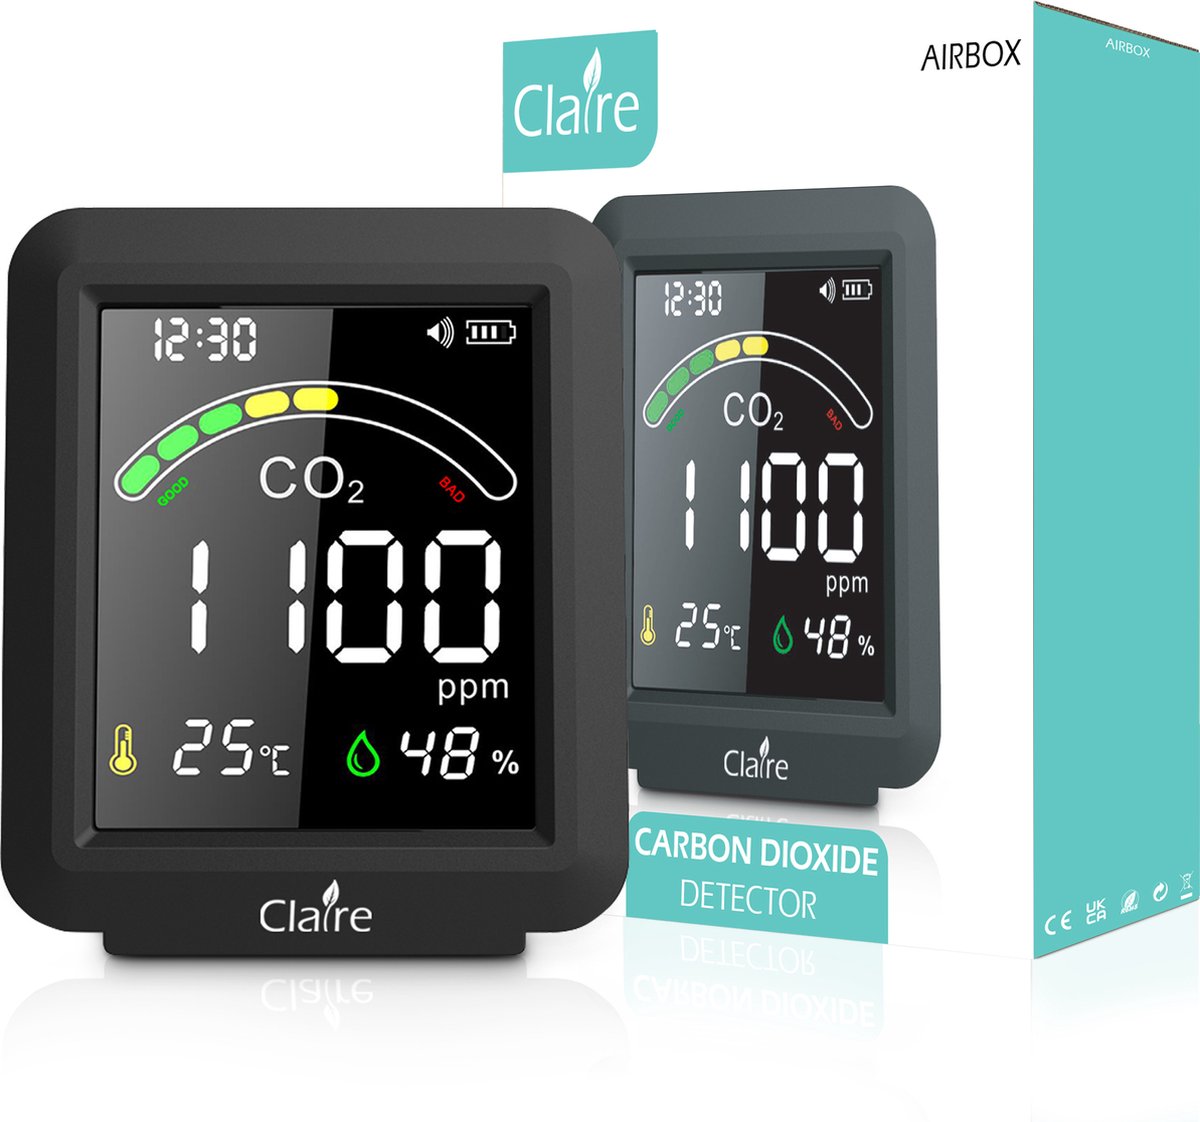 Claire Airbox CO2 meter review